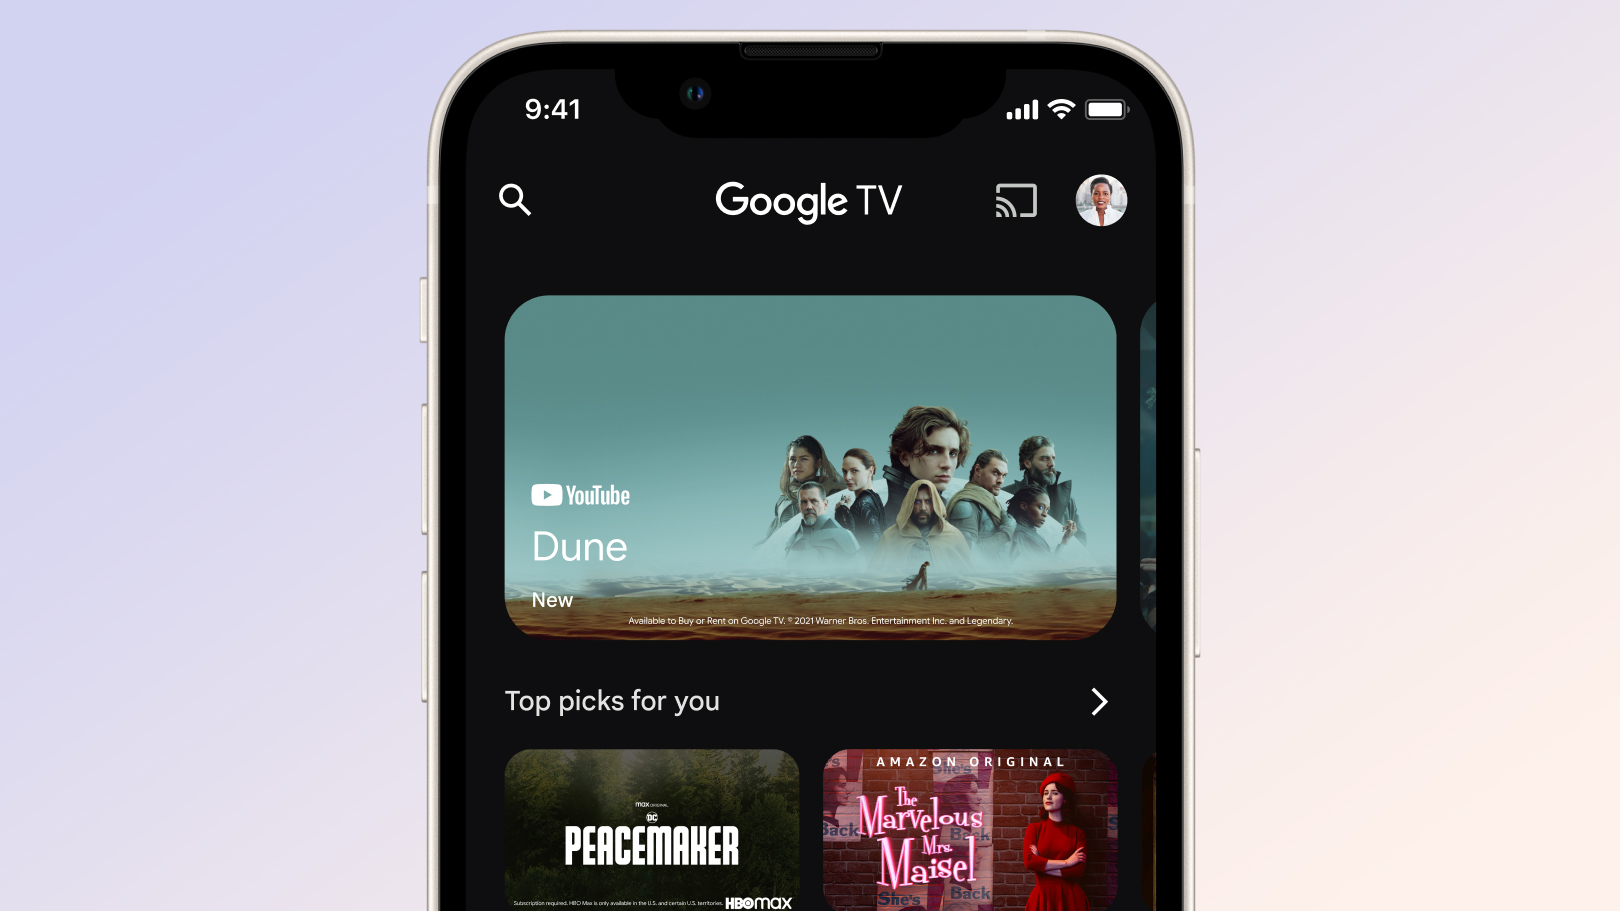 The Google TV app is finally on the iPhone — here’s what you can do